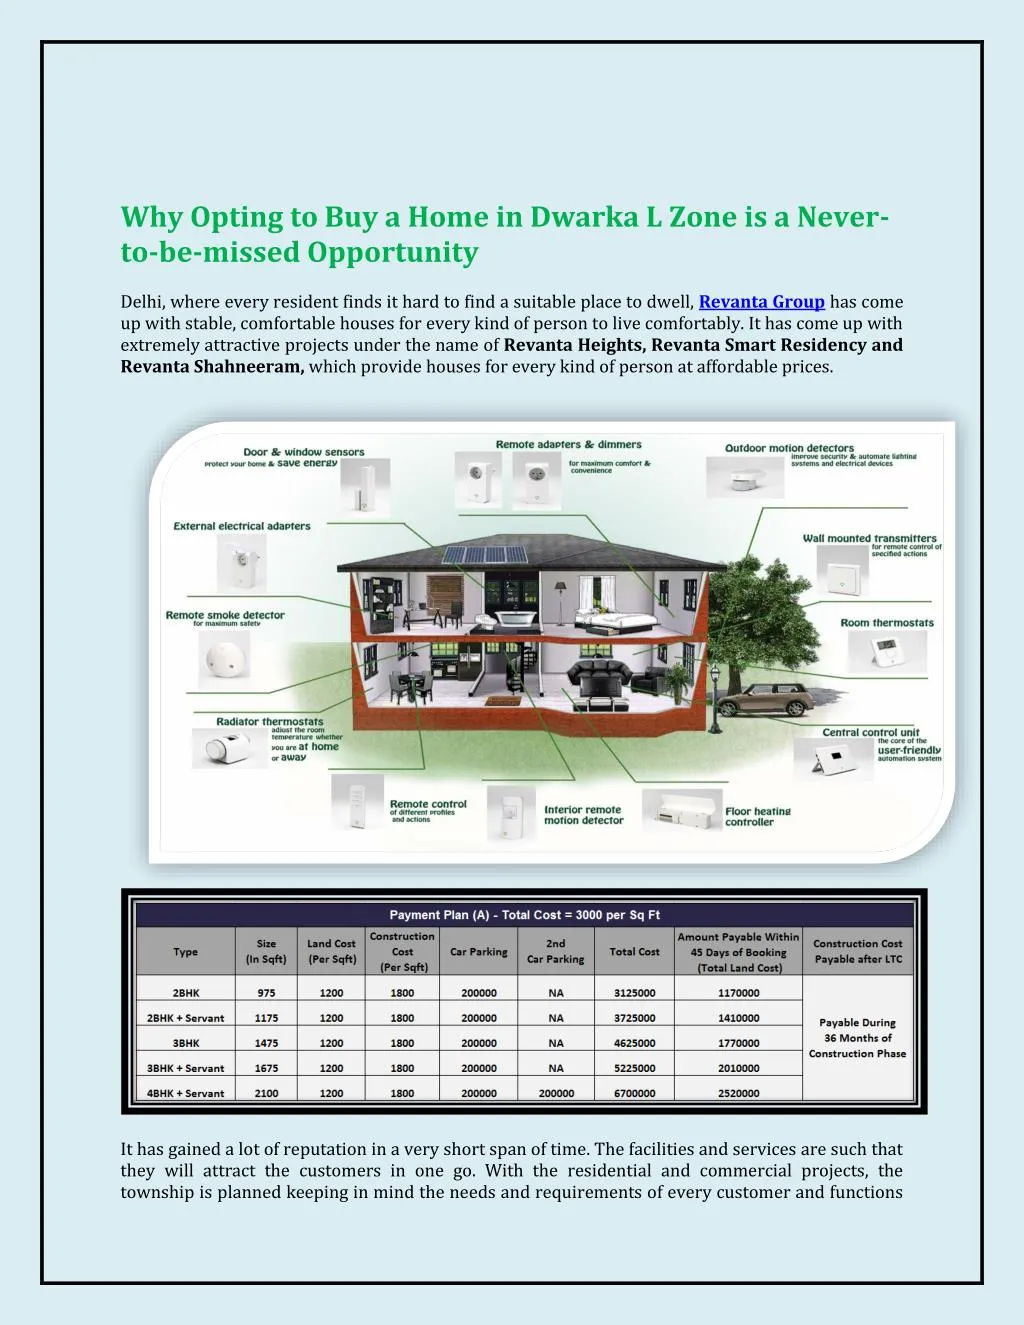 why opting to buy a home in dwarka l zone